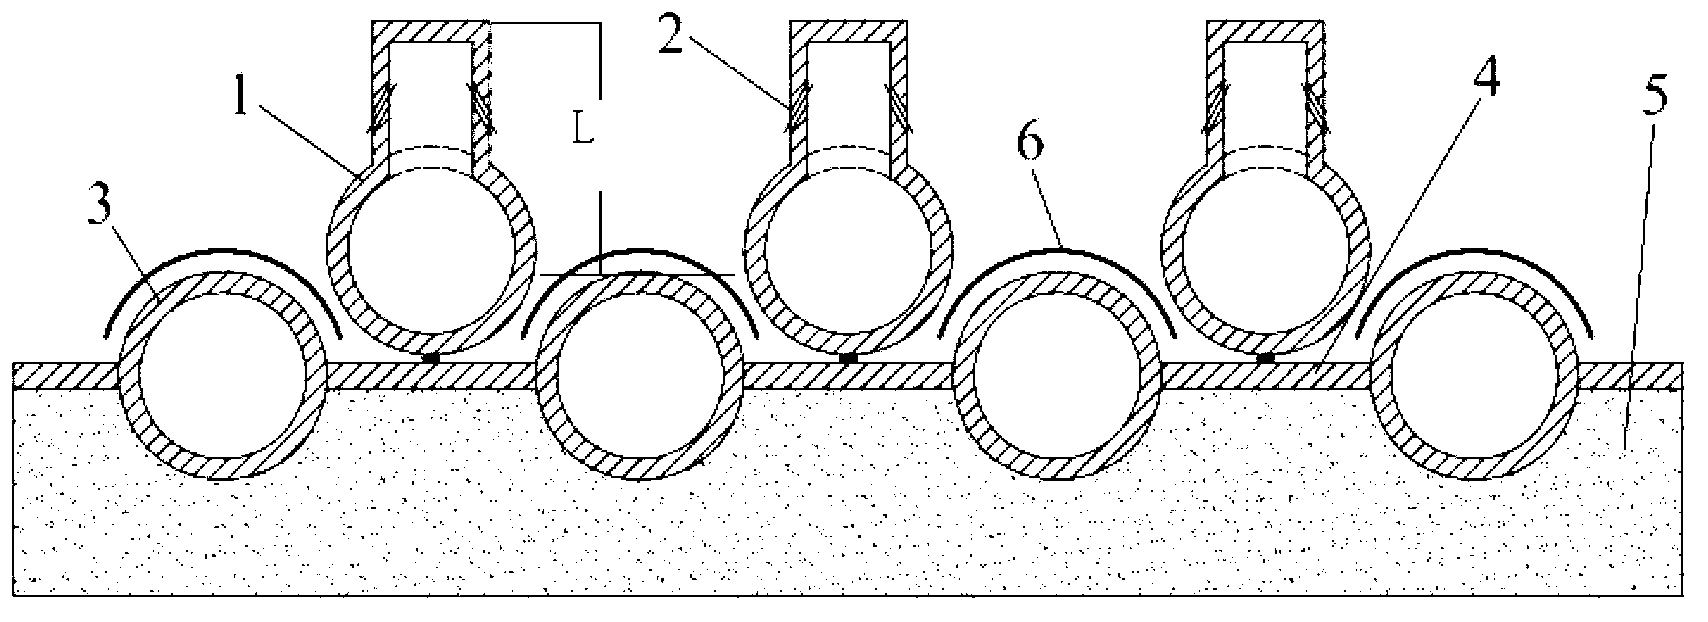 Pneumatic dust cleaning device of boiler